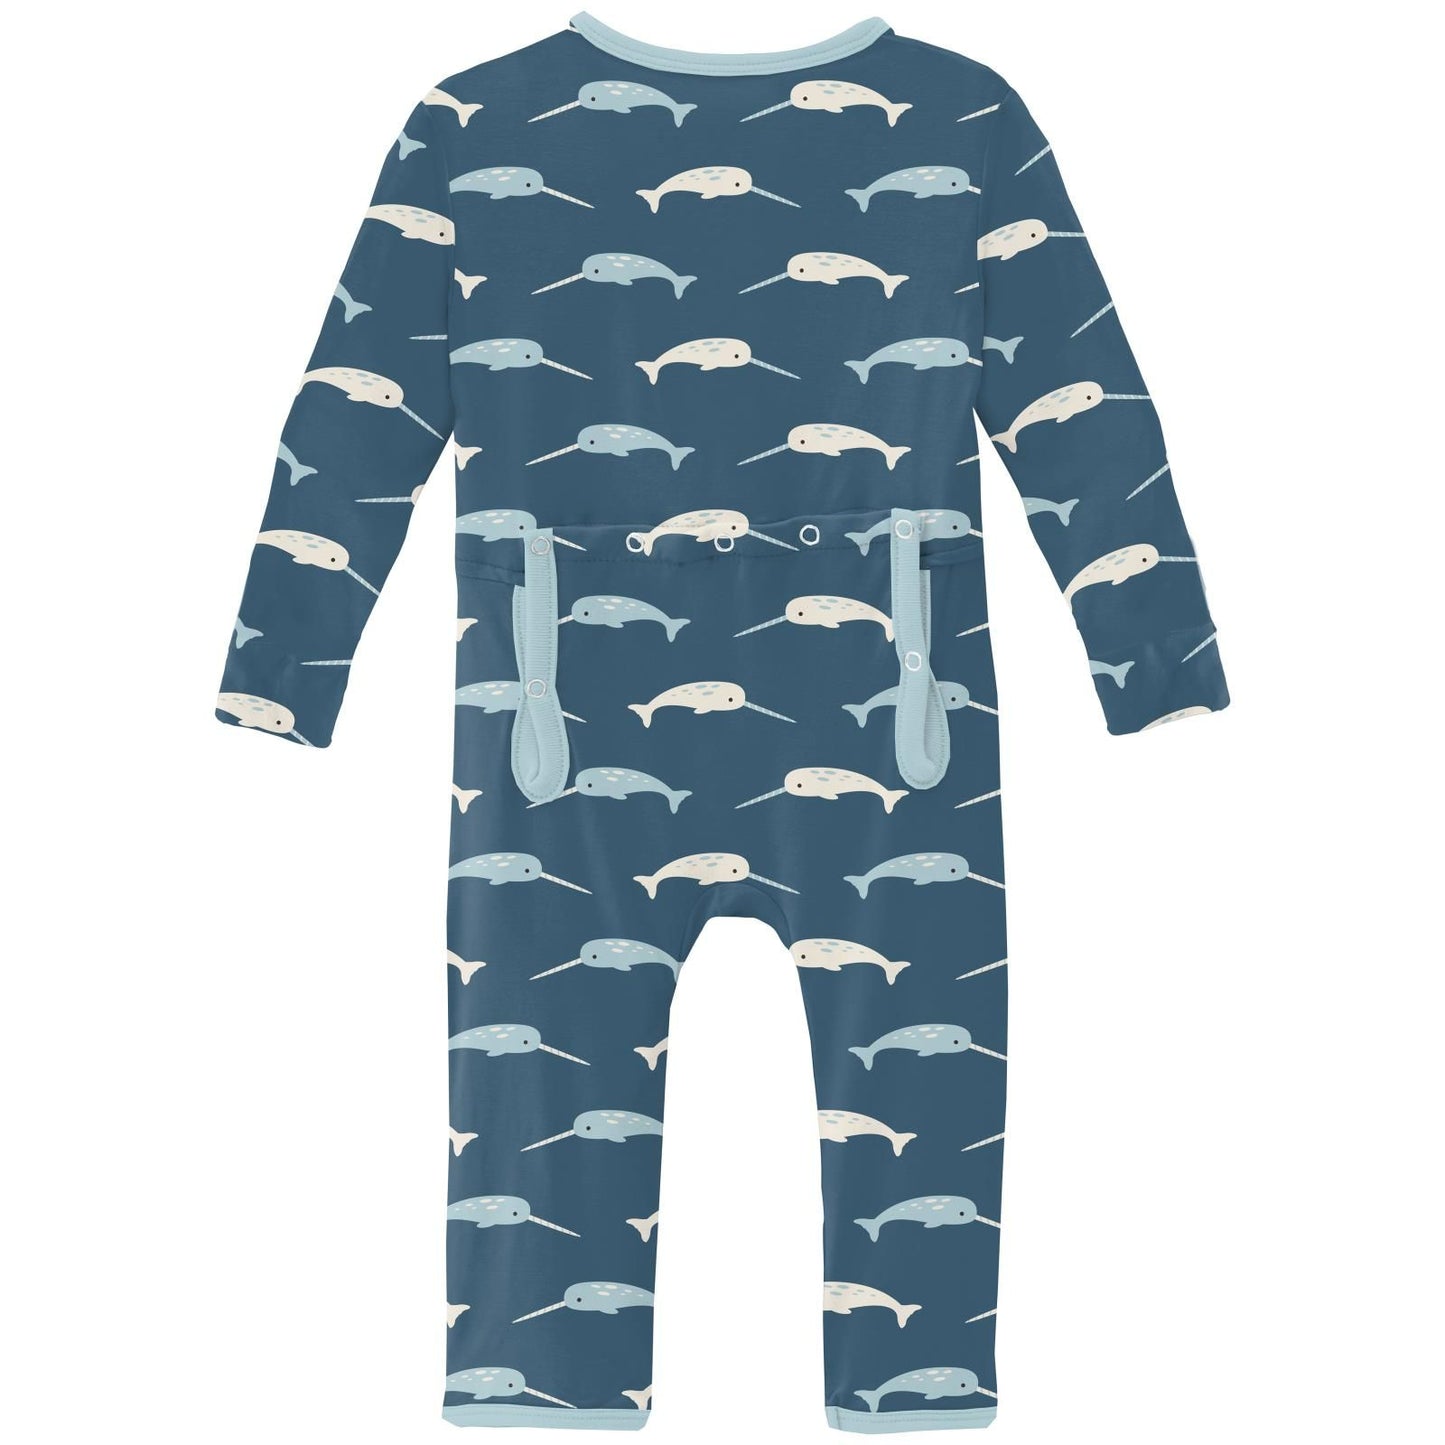 Coverall (2 Way Zipper) - Deep Sea Narwhal